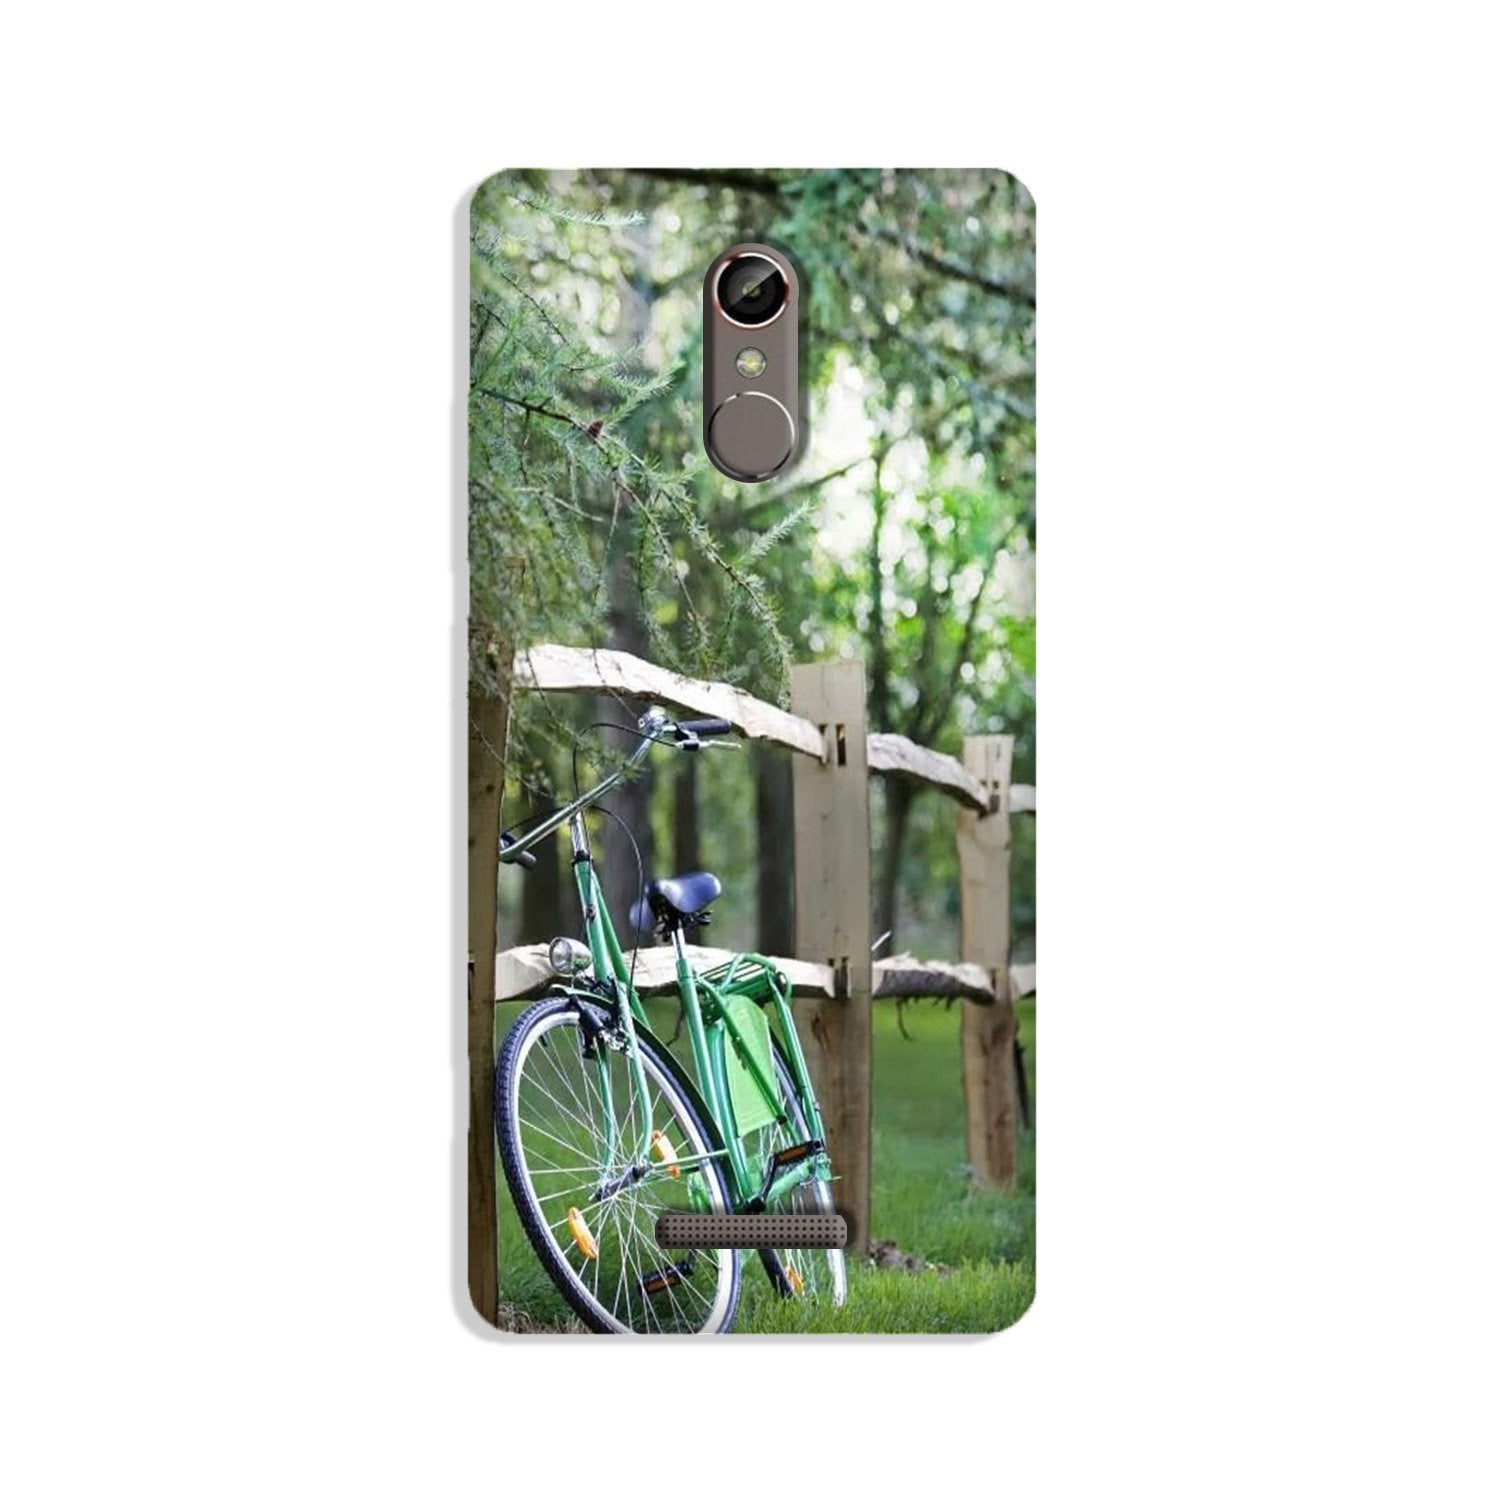 Bicycle Case for Gionee S6s (Design No. 208)